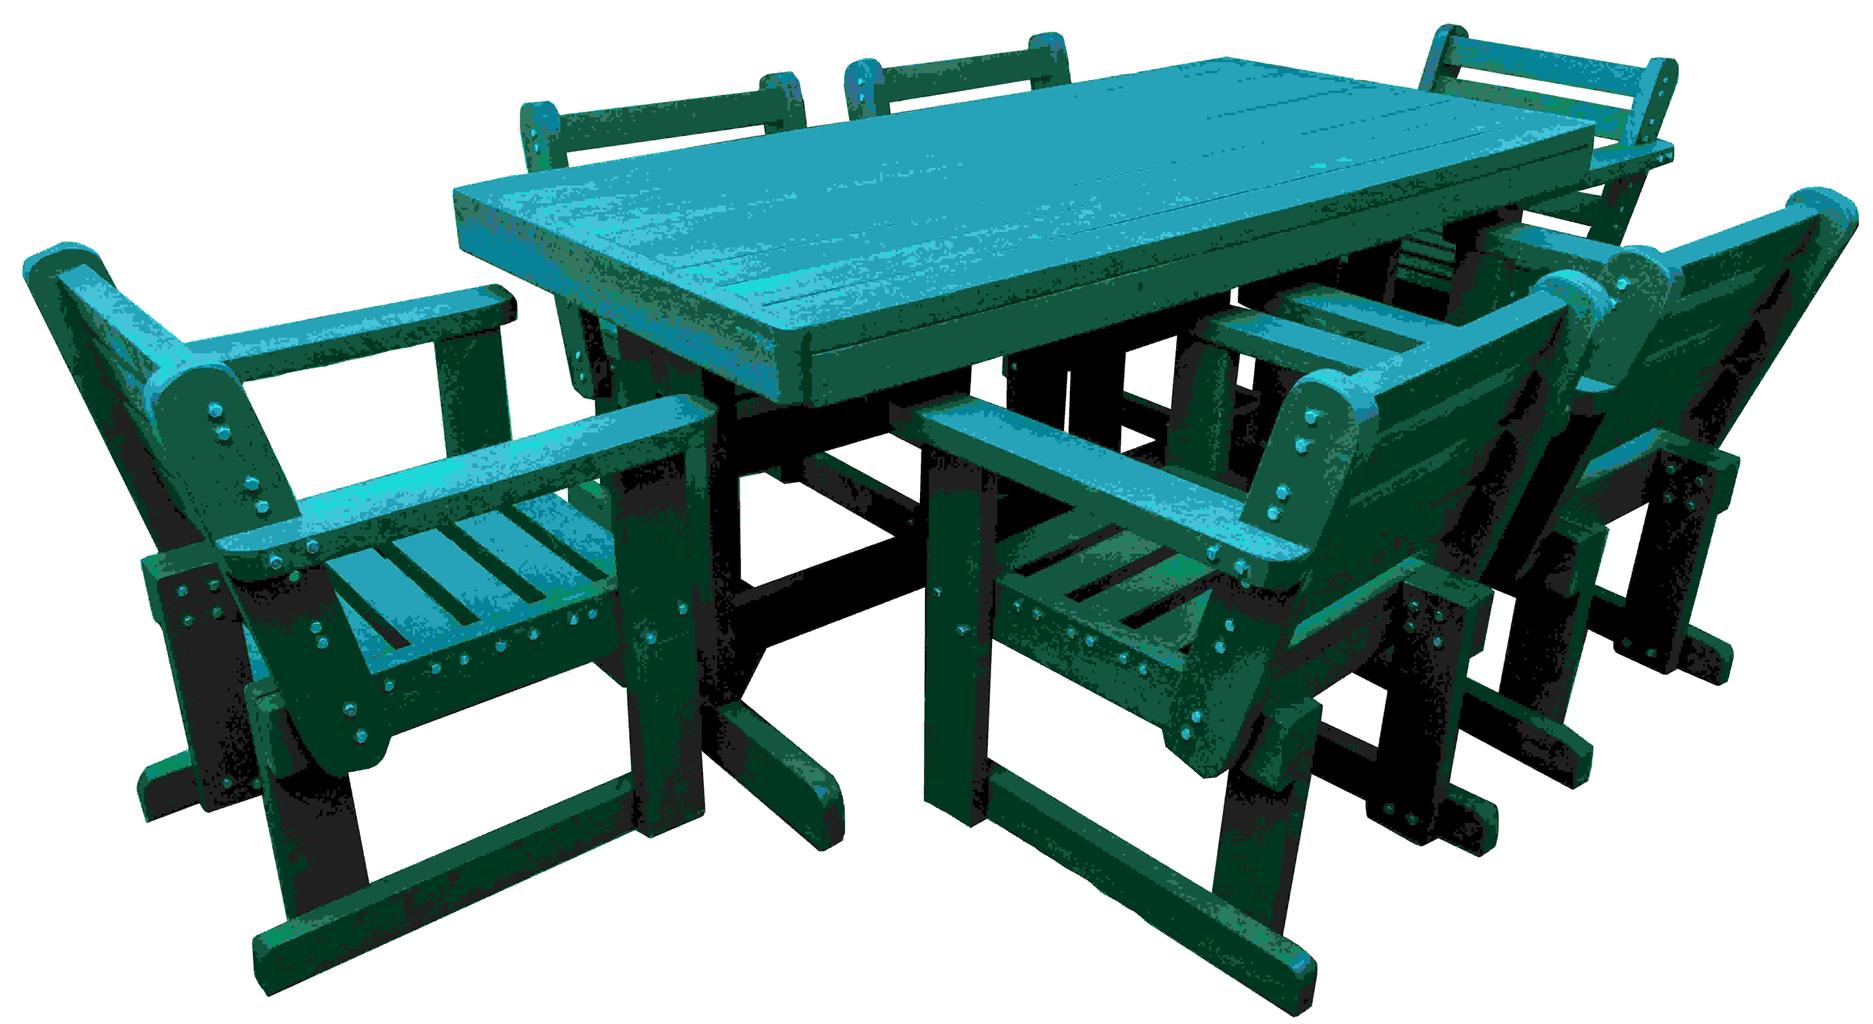 Law and Patio Green Plastic Furniture 